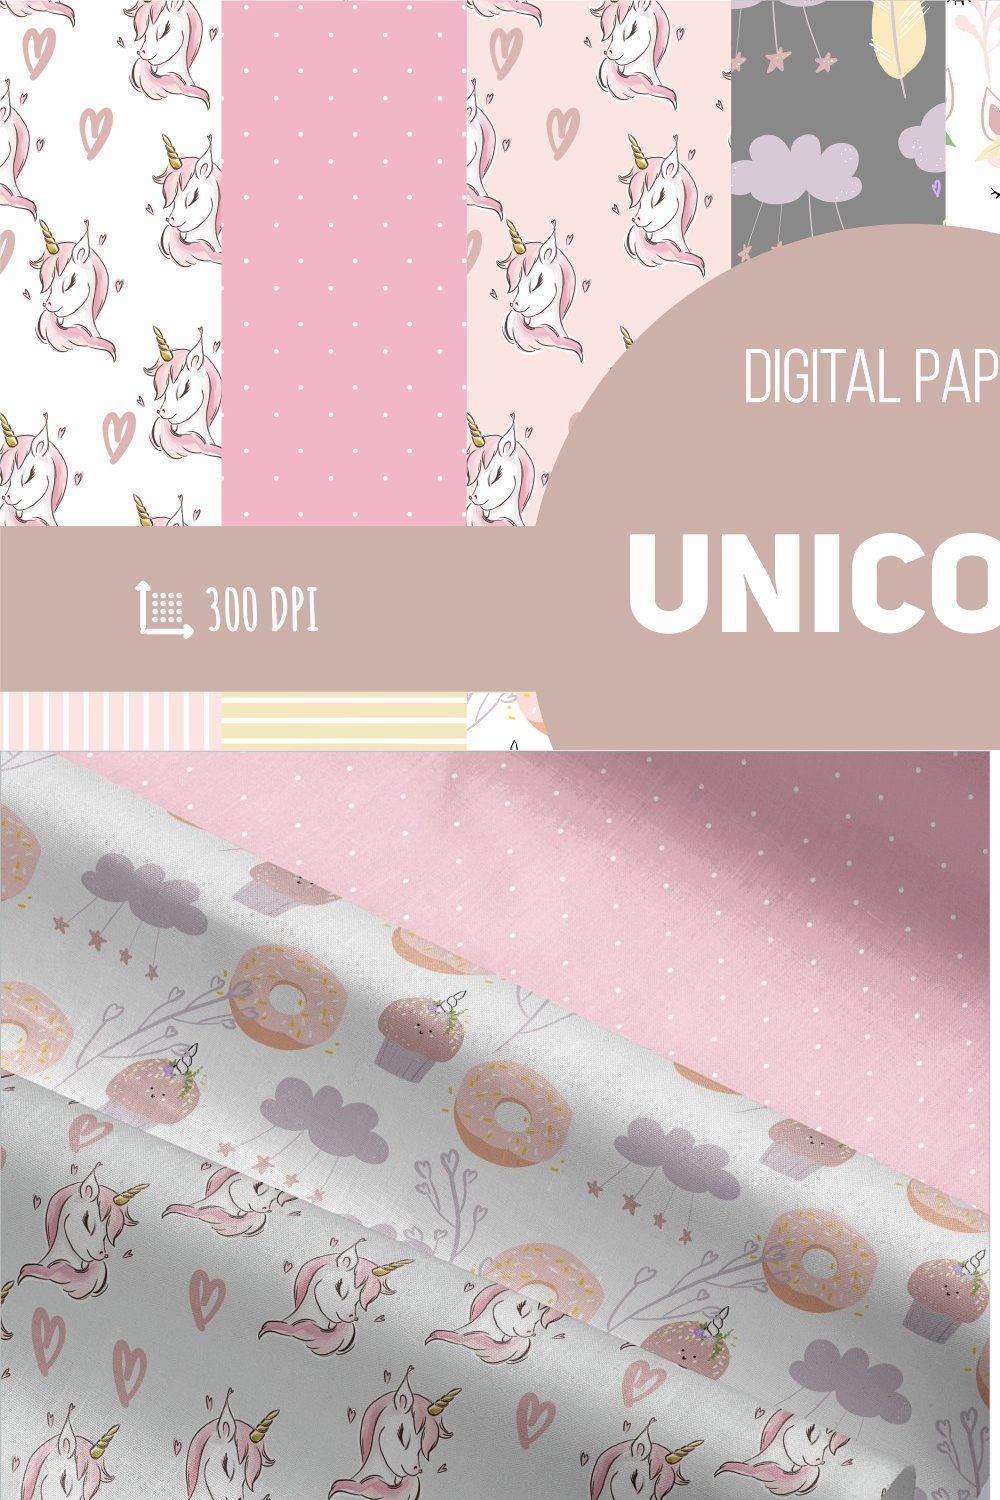 Unicorn patterns. Digital papers pinterest preview image.